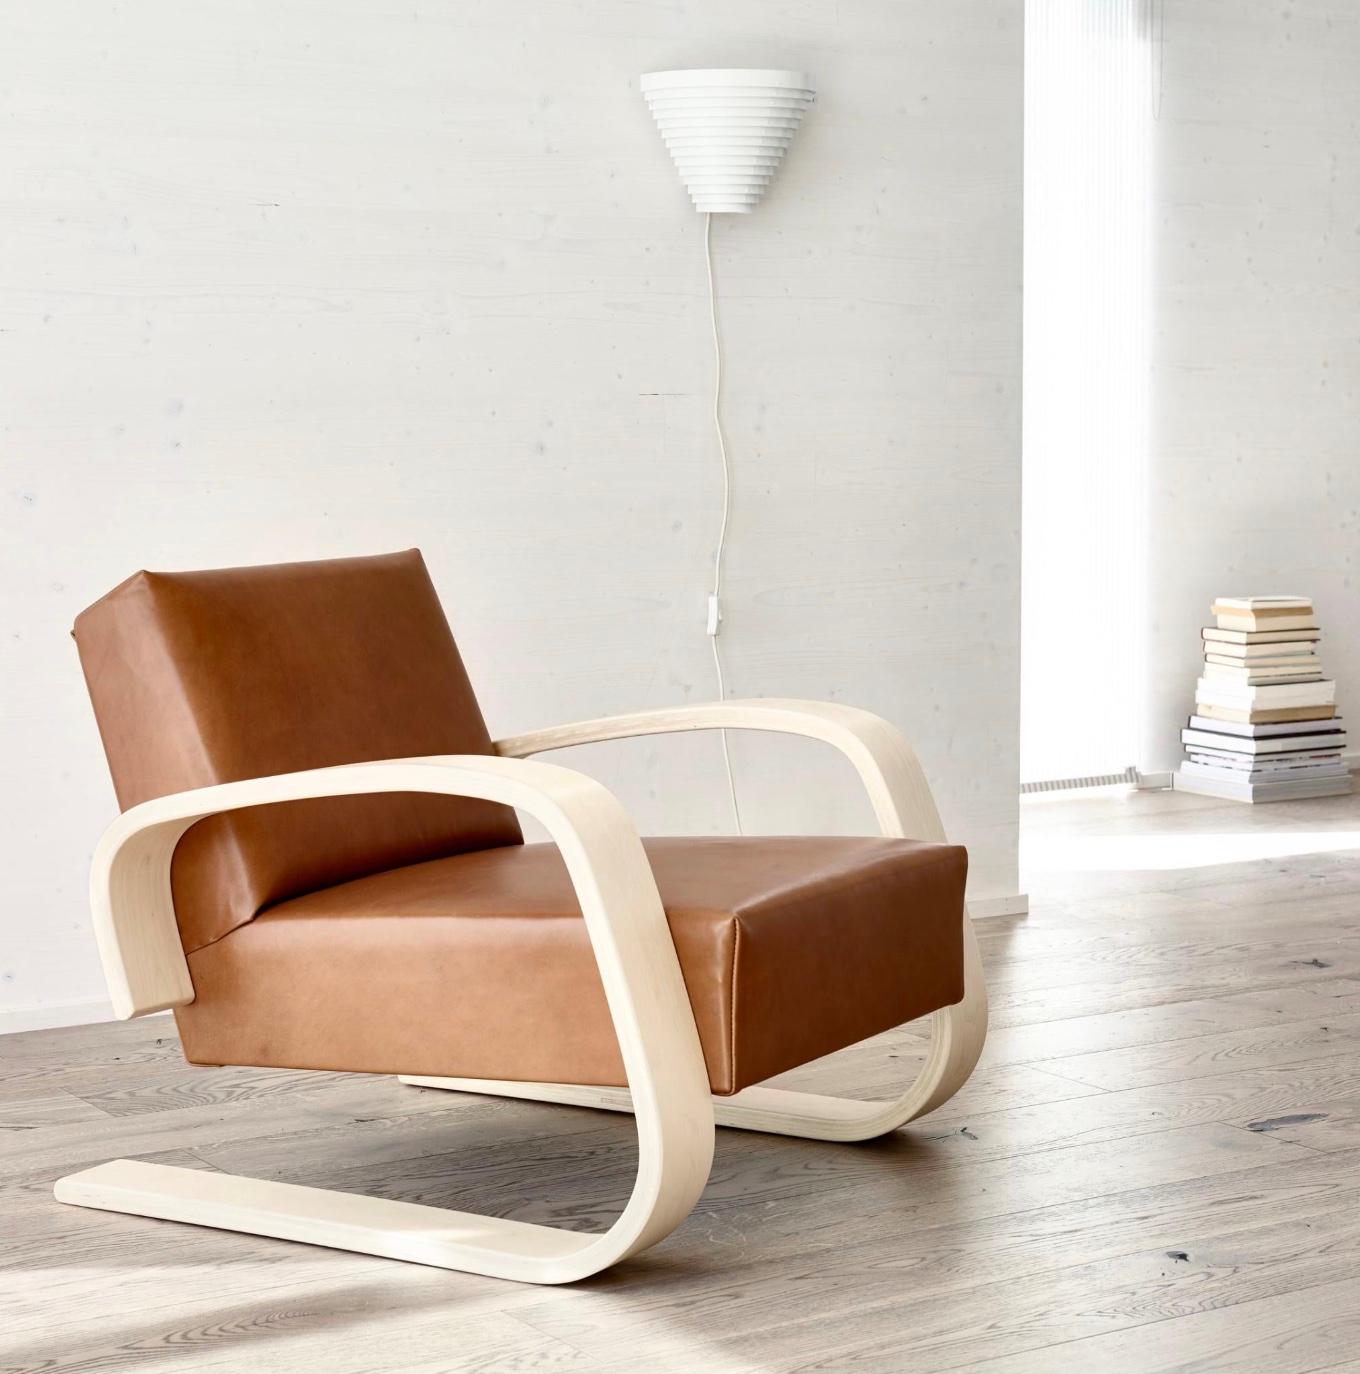 Alvar Aalto Pair of 400 ‘Tank’ Armchair for Artek. Designed in 1936. New, current production. Please note: the price is for 2 chairs with Kvadat Tonus (F100 fabric group) and stained armrests. Other configurations on request.

As voluminous as it